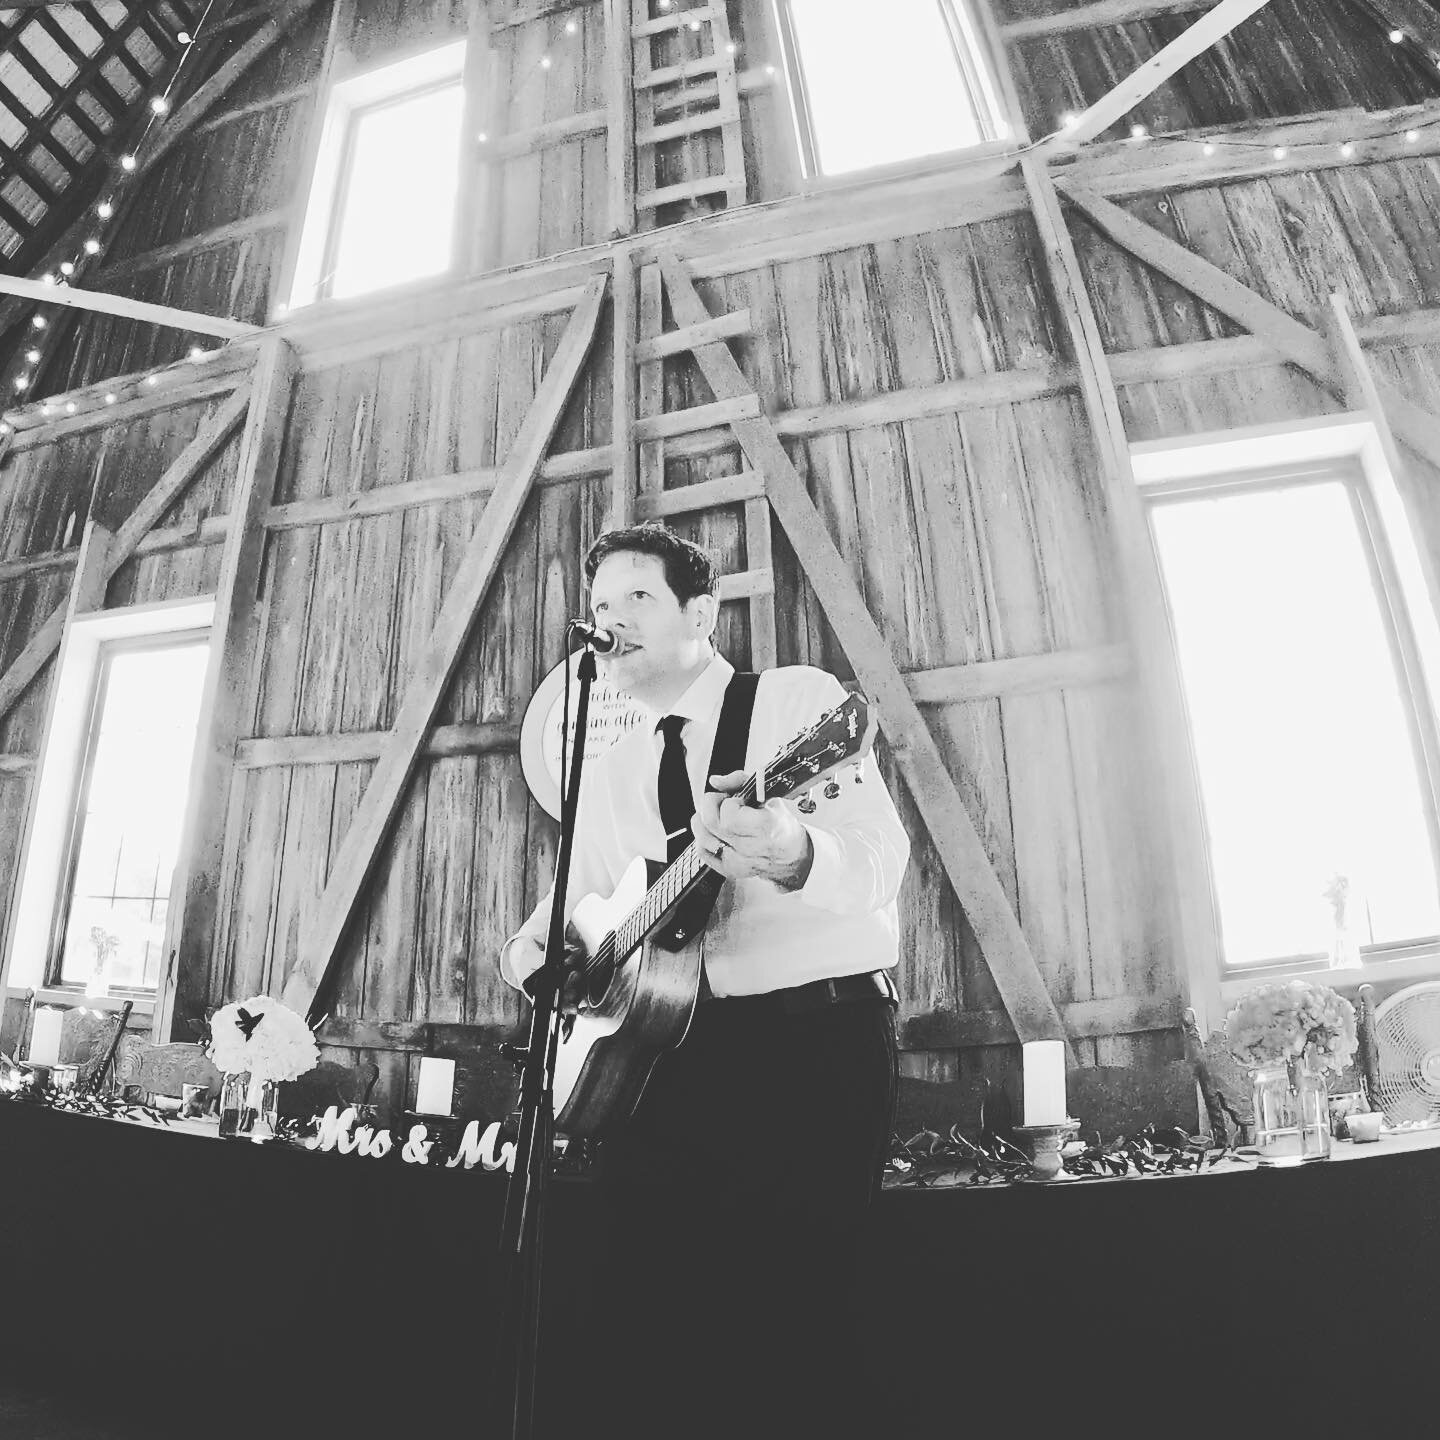 One more from this past weekend 🎶

#livemusic 
#musician 
#cocktailhour 
#taylorguitars 
#wedding
#theknot 
#theknotweddings